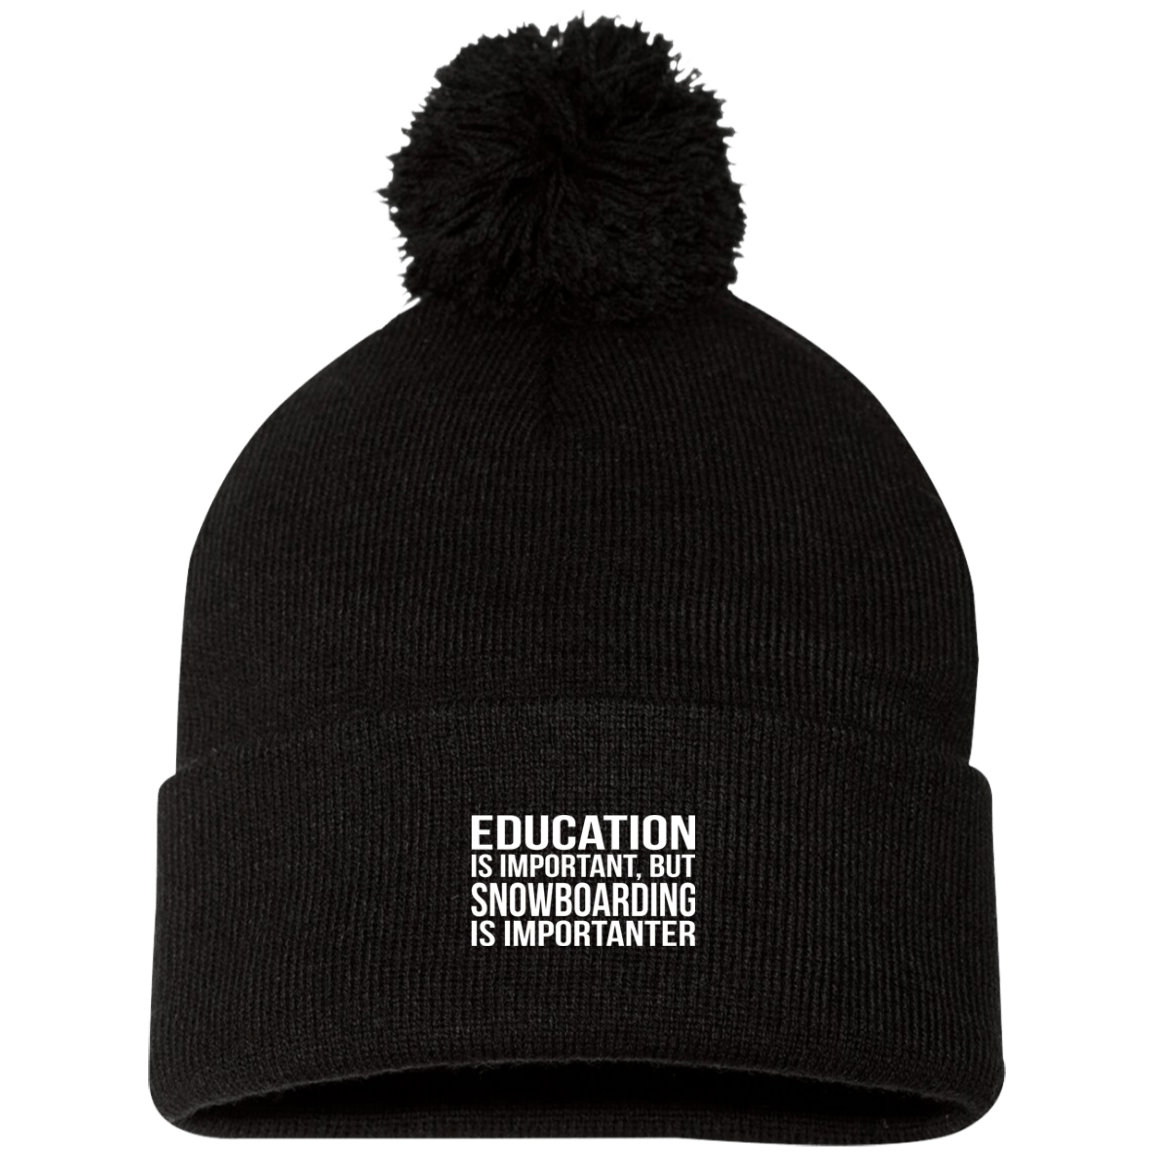 Education is Important but Snowboarding is Importanter Pom Pom Knit Cap - Powderaddicts